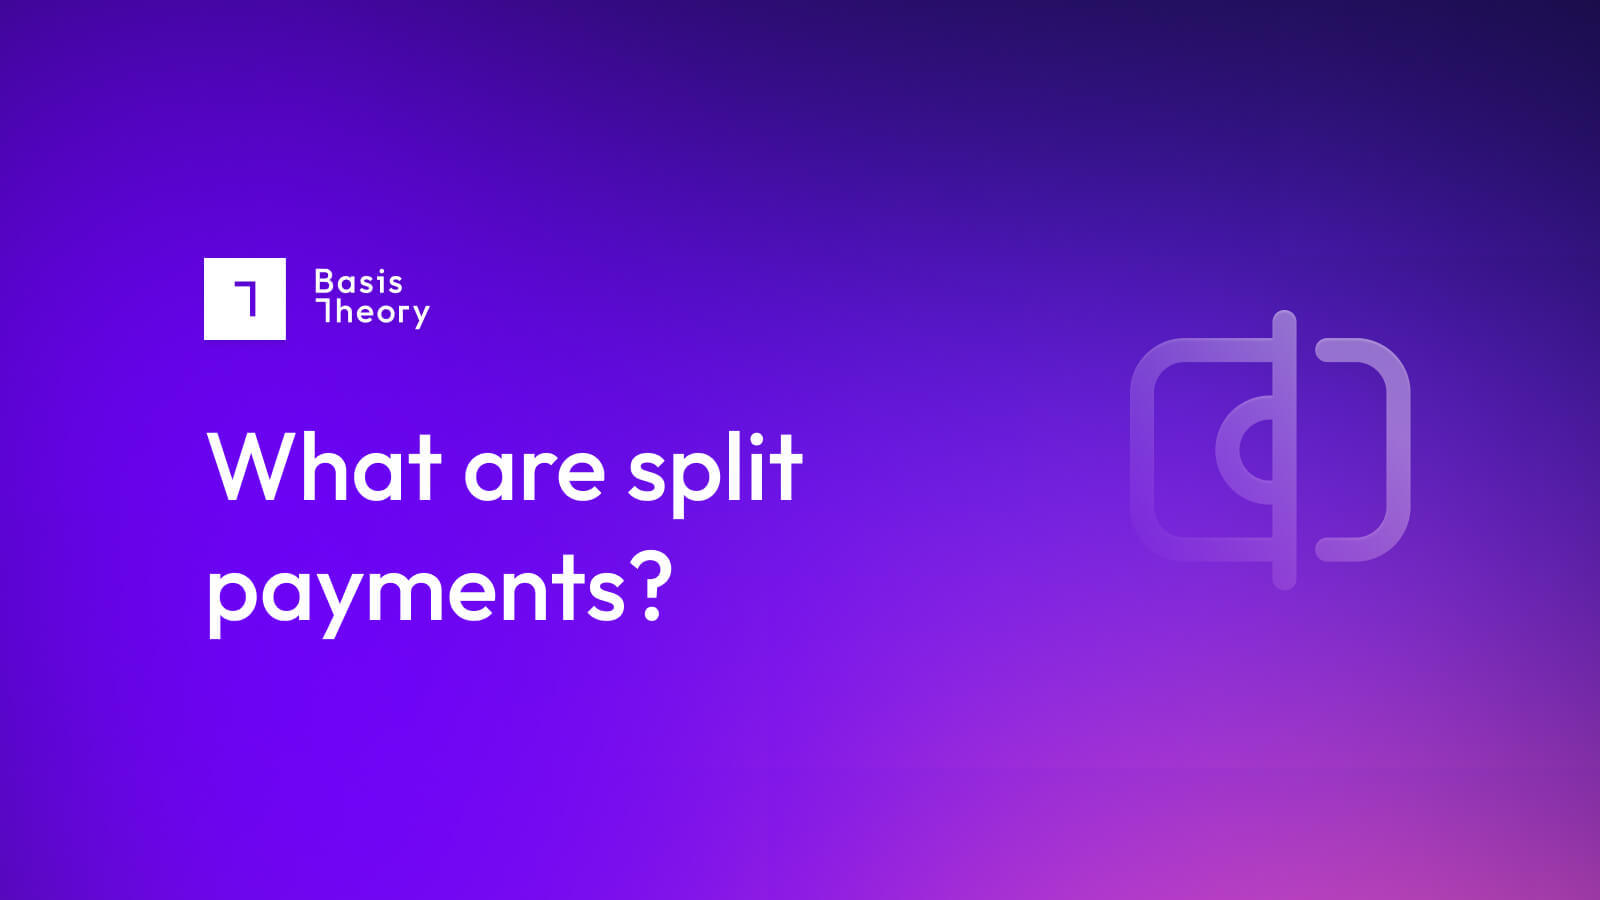 What are split payments?